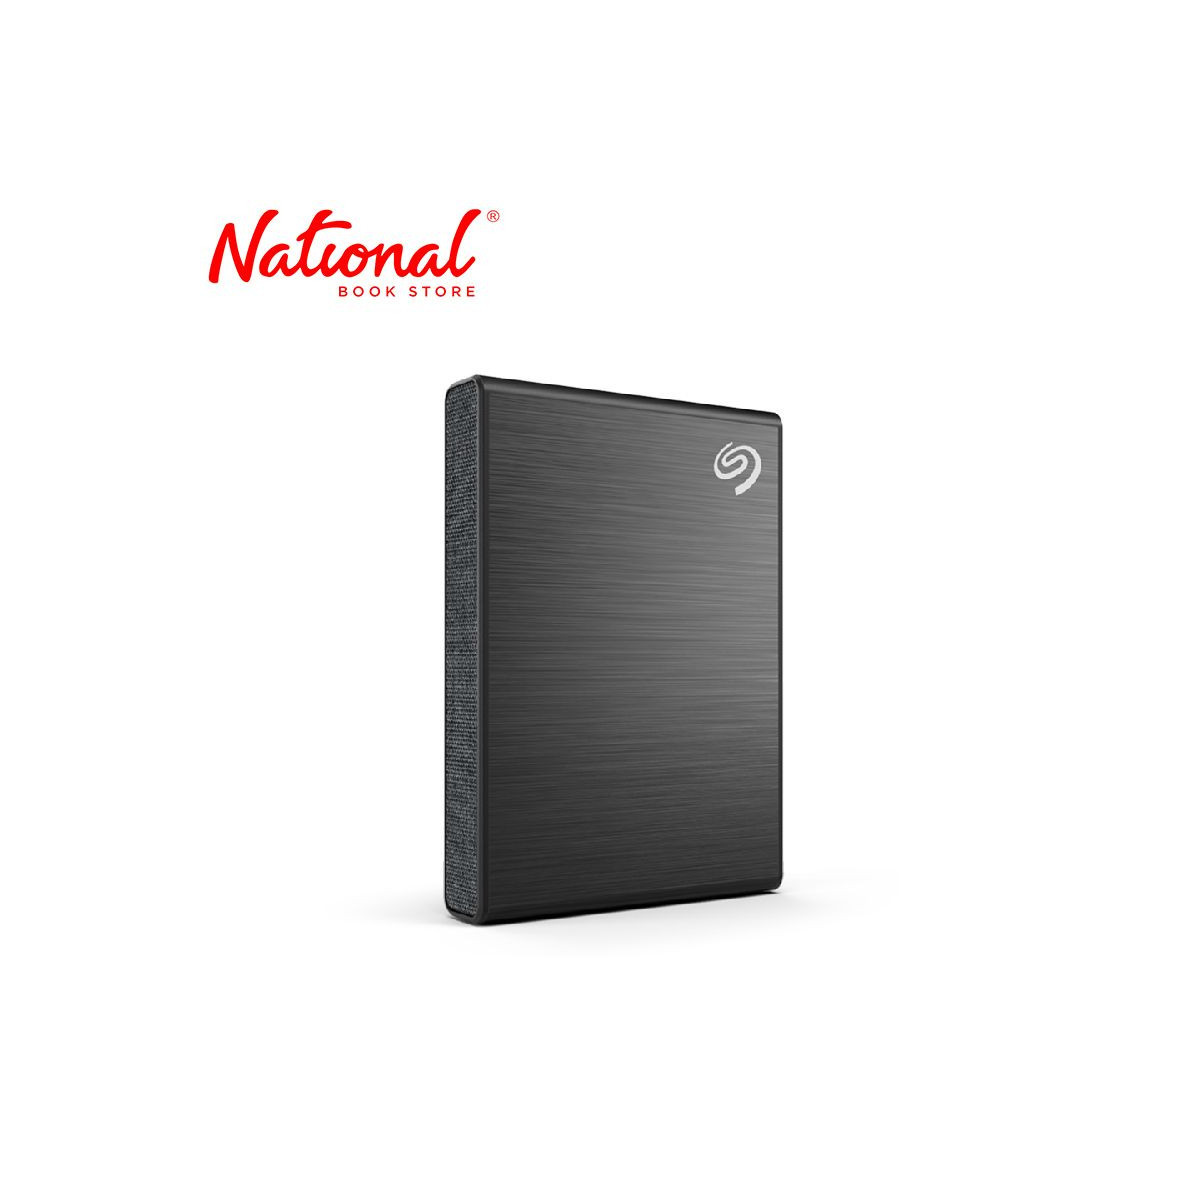 Seagate Hard Drive 1TB 2.5 One-Touch Slim Black - School Office Work from Home Essentials